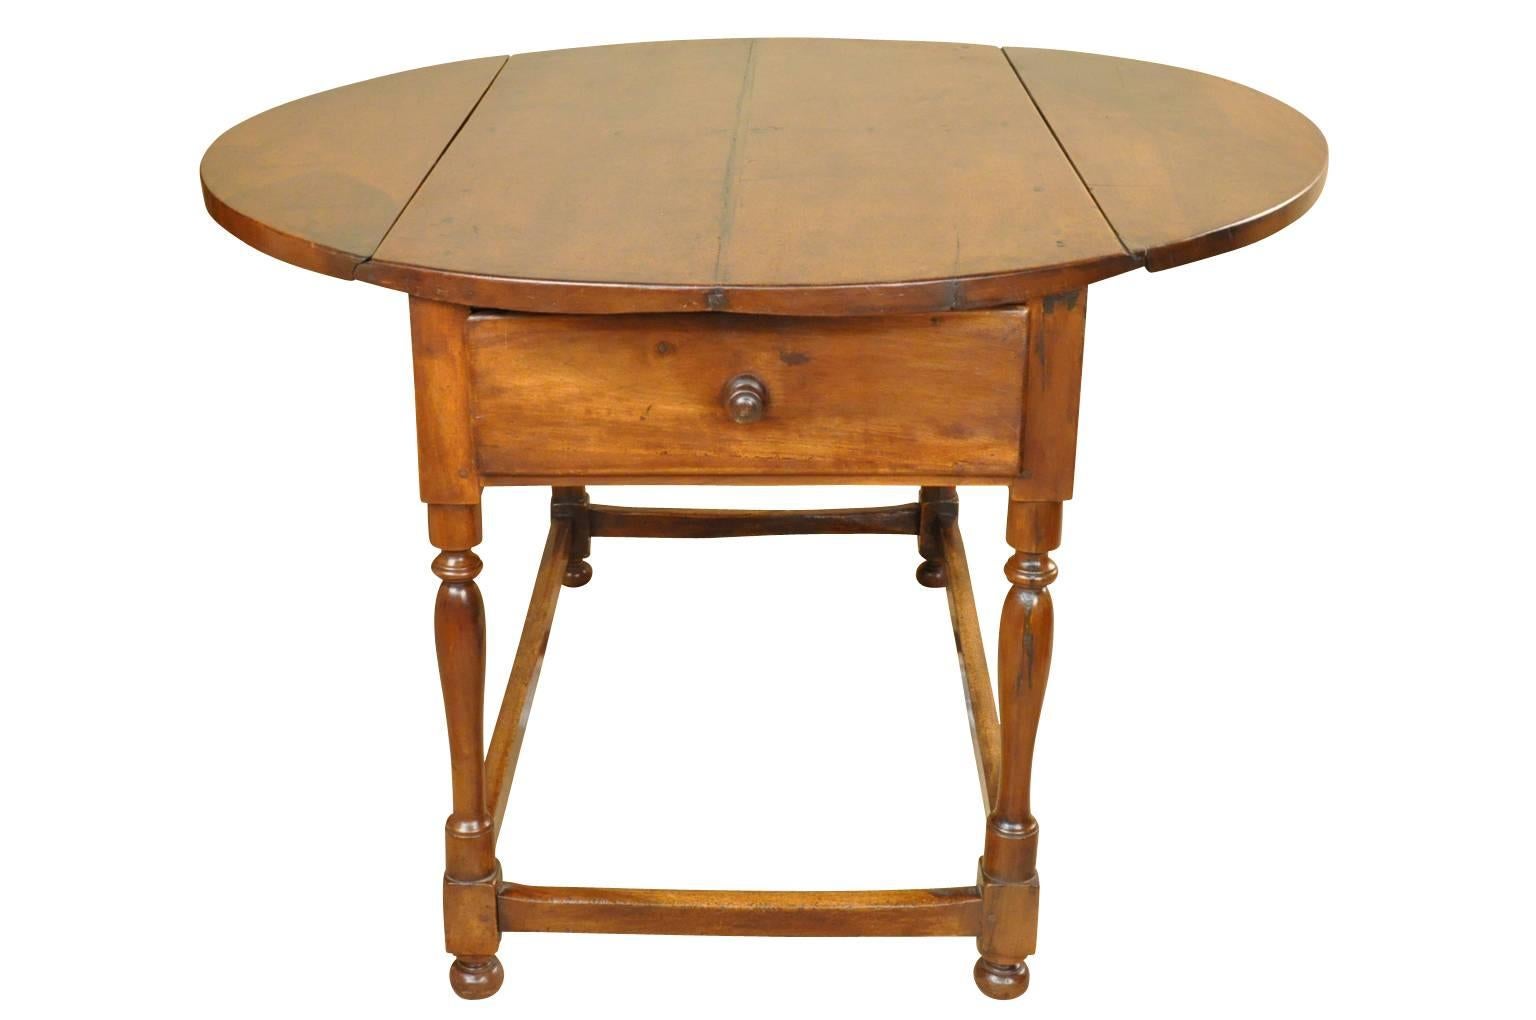 A very handsome 18th century oval shaped drop-leaf table from the Provence region of France. Wonderfully constructed with lovely turned legs and two drawers. The top surface is constructed with thick planks. All in solid walnut. The graining and